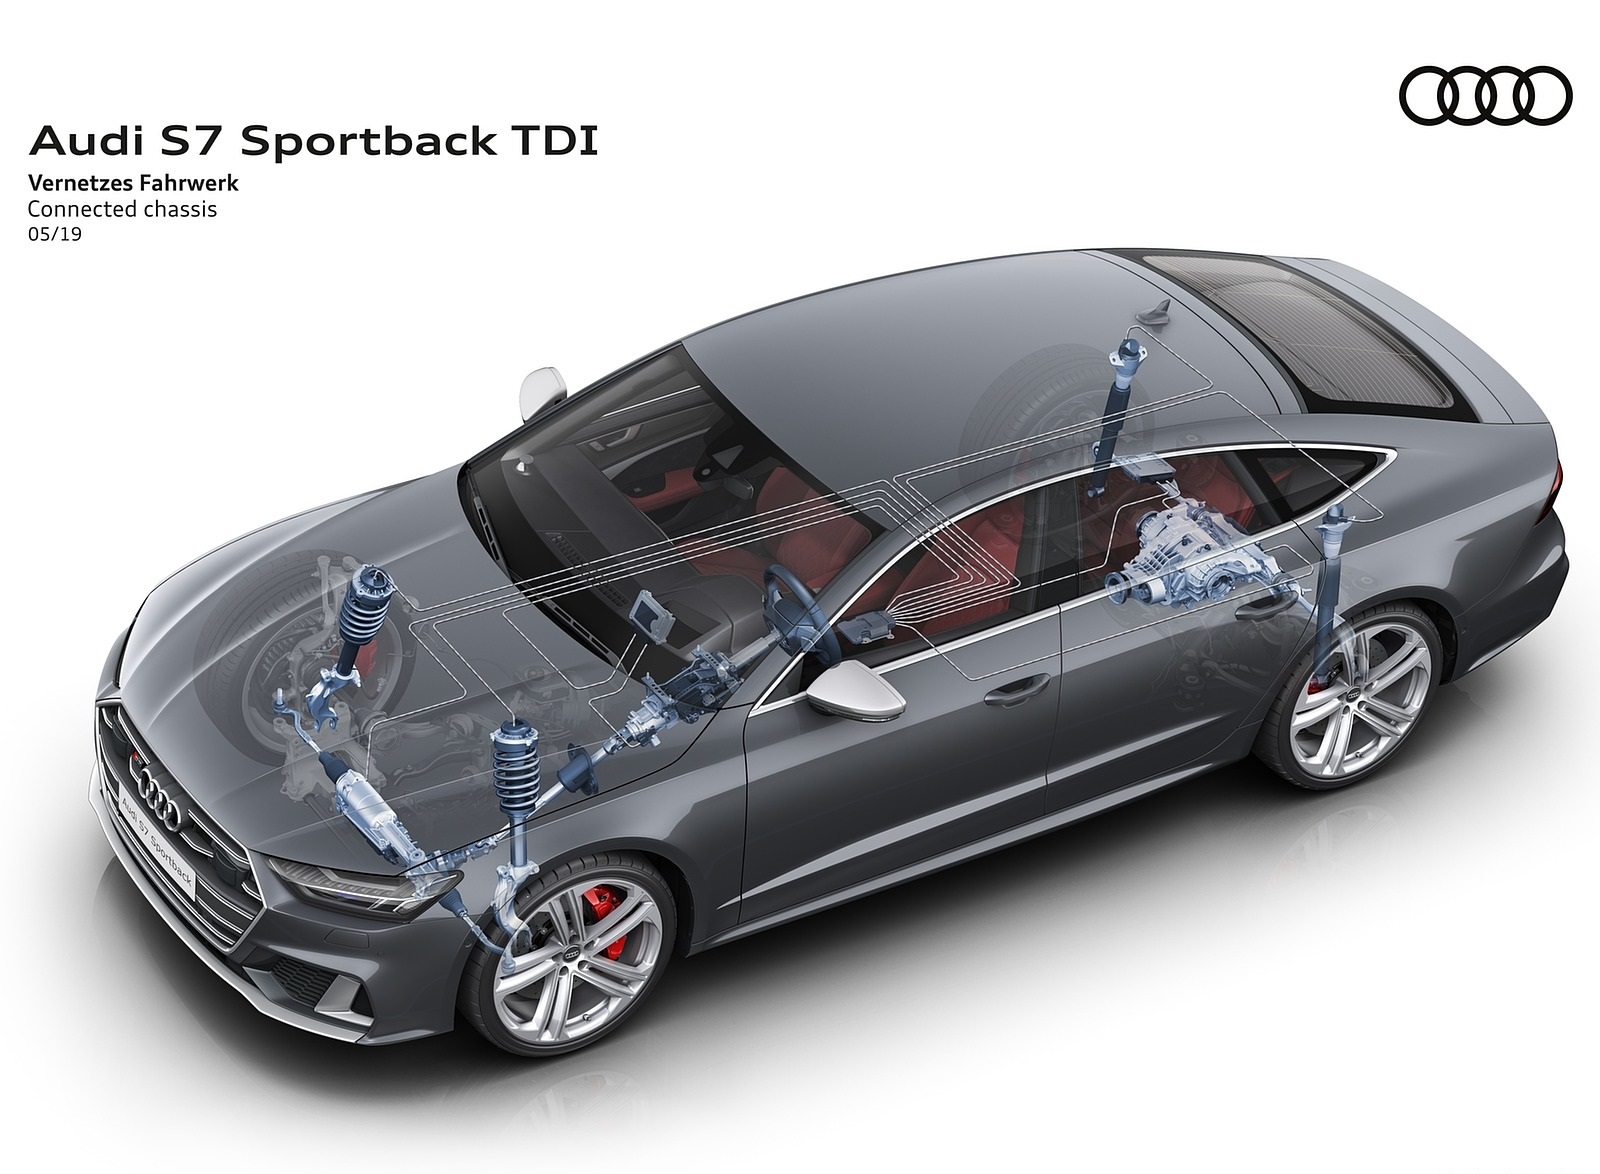 2020 Audi S7 Sportback TDI Connected Chassis Wallpapers #81 of 88